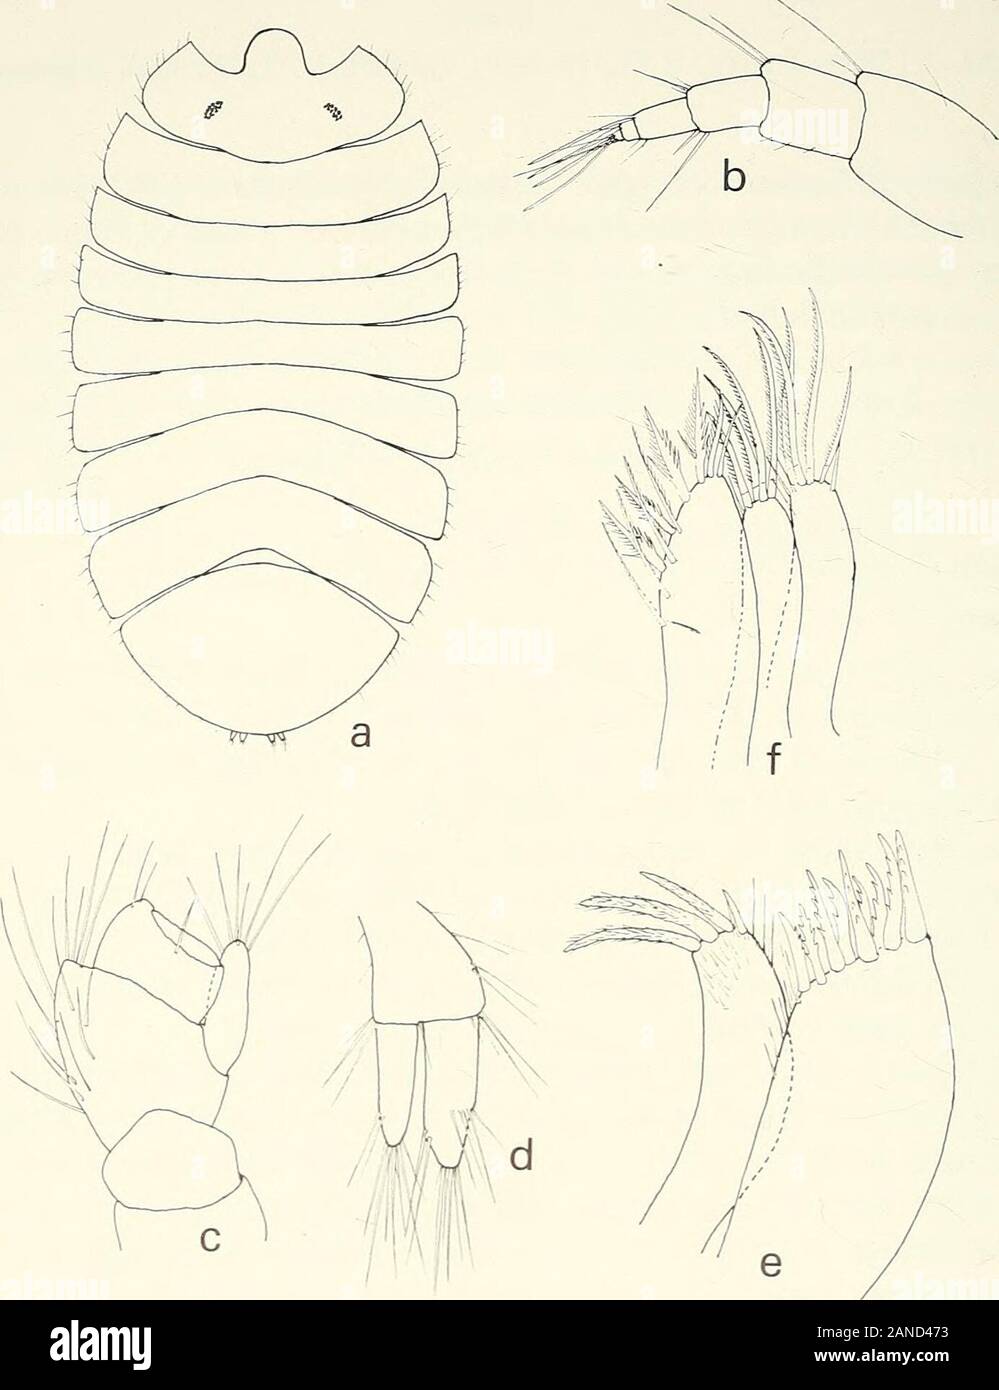 Annals of the South African Museum = Annale van die Suid-Afrikaanse Museum . Pereiopod I subchelate, dactylus ending in strong claw with seven or eightdentate spines on inner edge; propodus inflated, broadened distally; outerangle of palm armed with strong spine, palm armed with eight or nine fringedspines; outer surface of propodus strongly setose; carpus short, merus withtriangular setose process on dorsal margin; ischium with slightly producedsetose extension; basis with thickly setose area on anterior surface. Pleopods I basally fused, distally truncate, with outer distal angles some-what Stock Photo